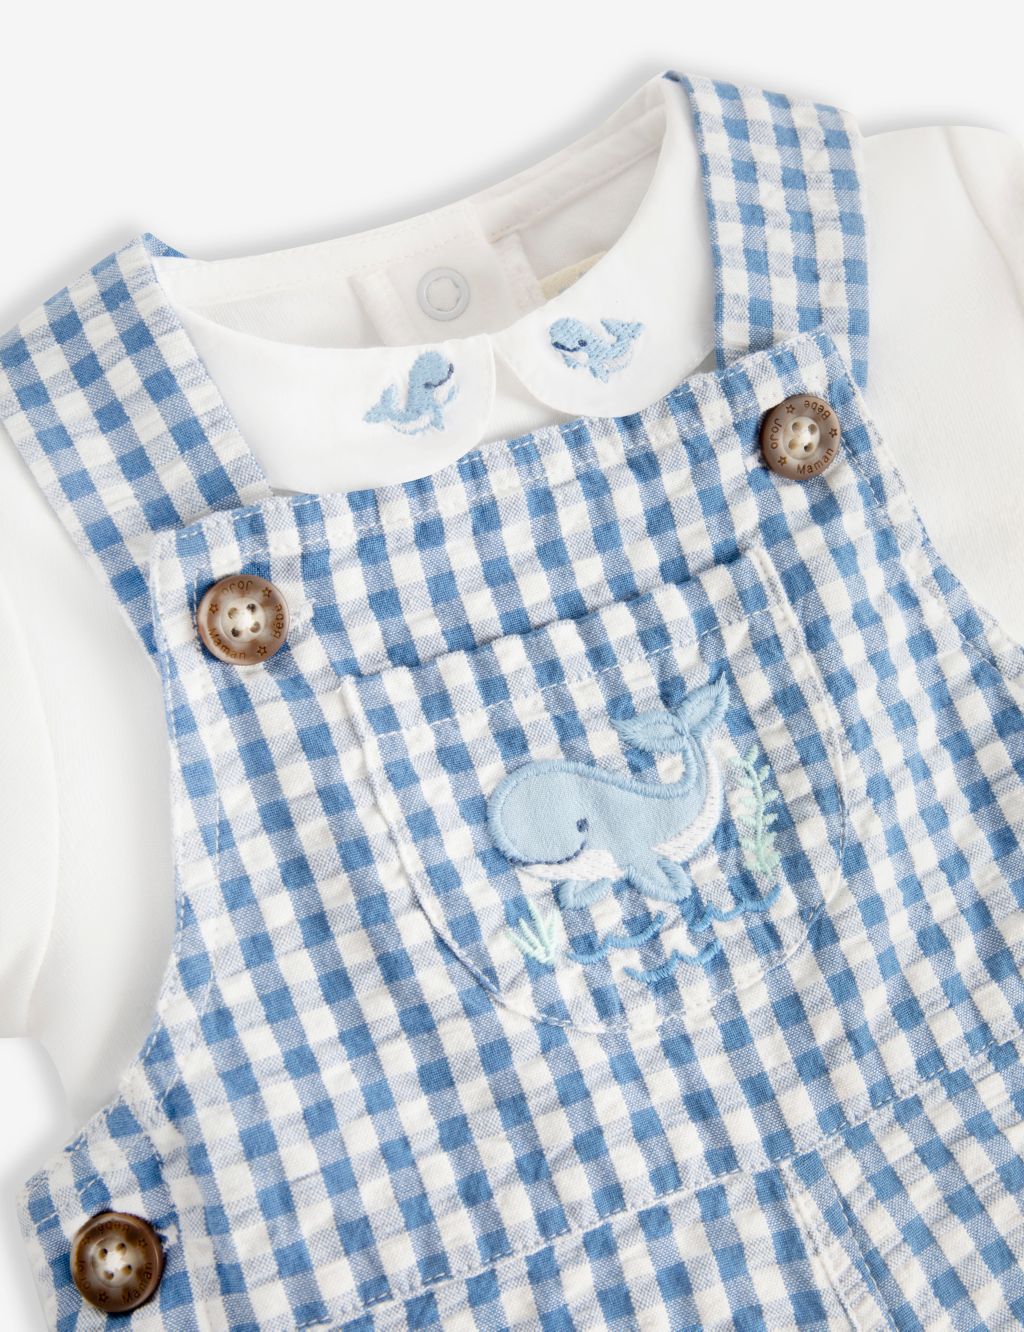 2pc Pure Cotton Gingham Outfit (0-24 Mths) 2 of 3